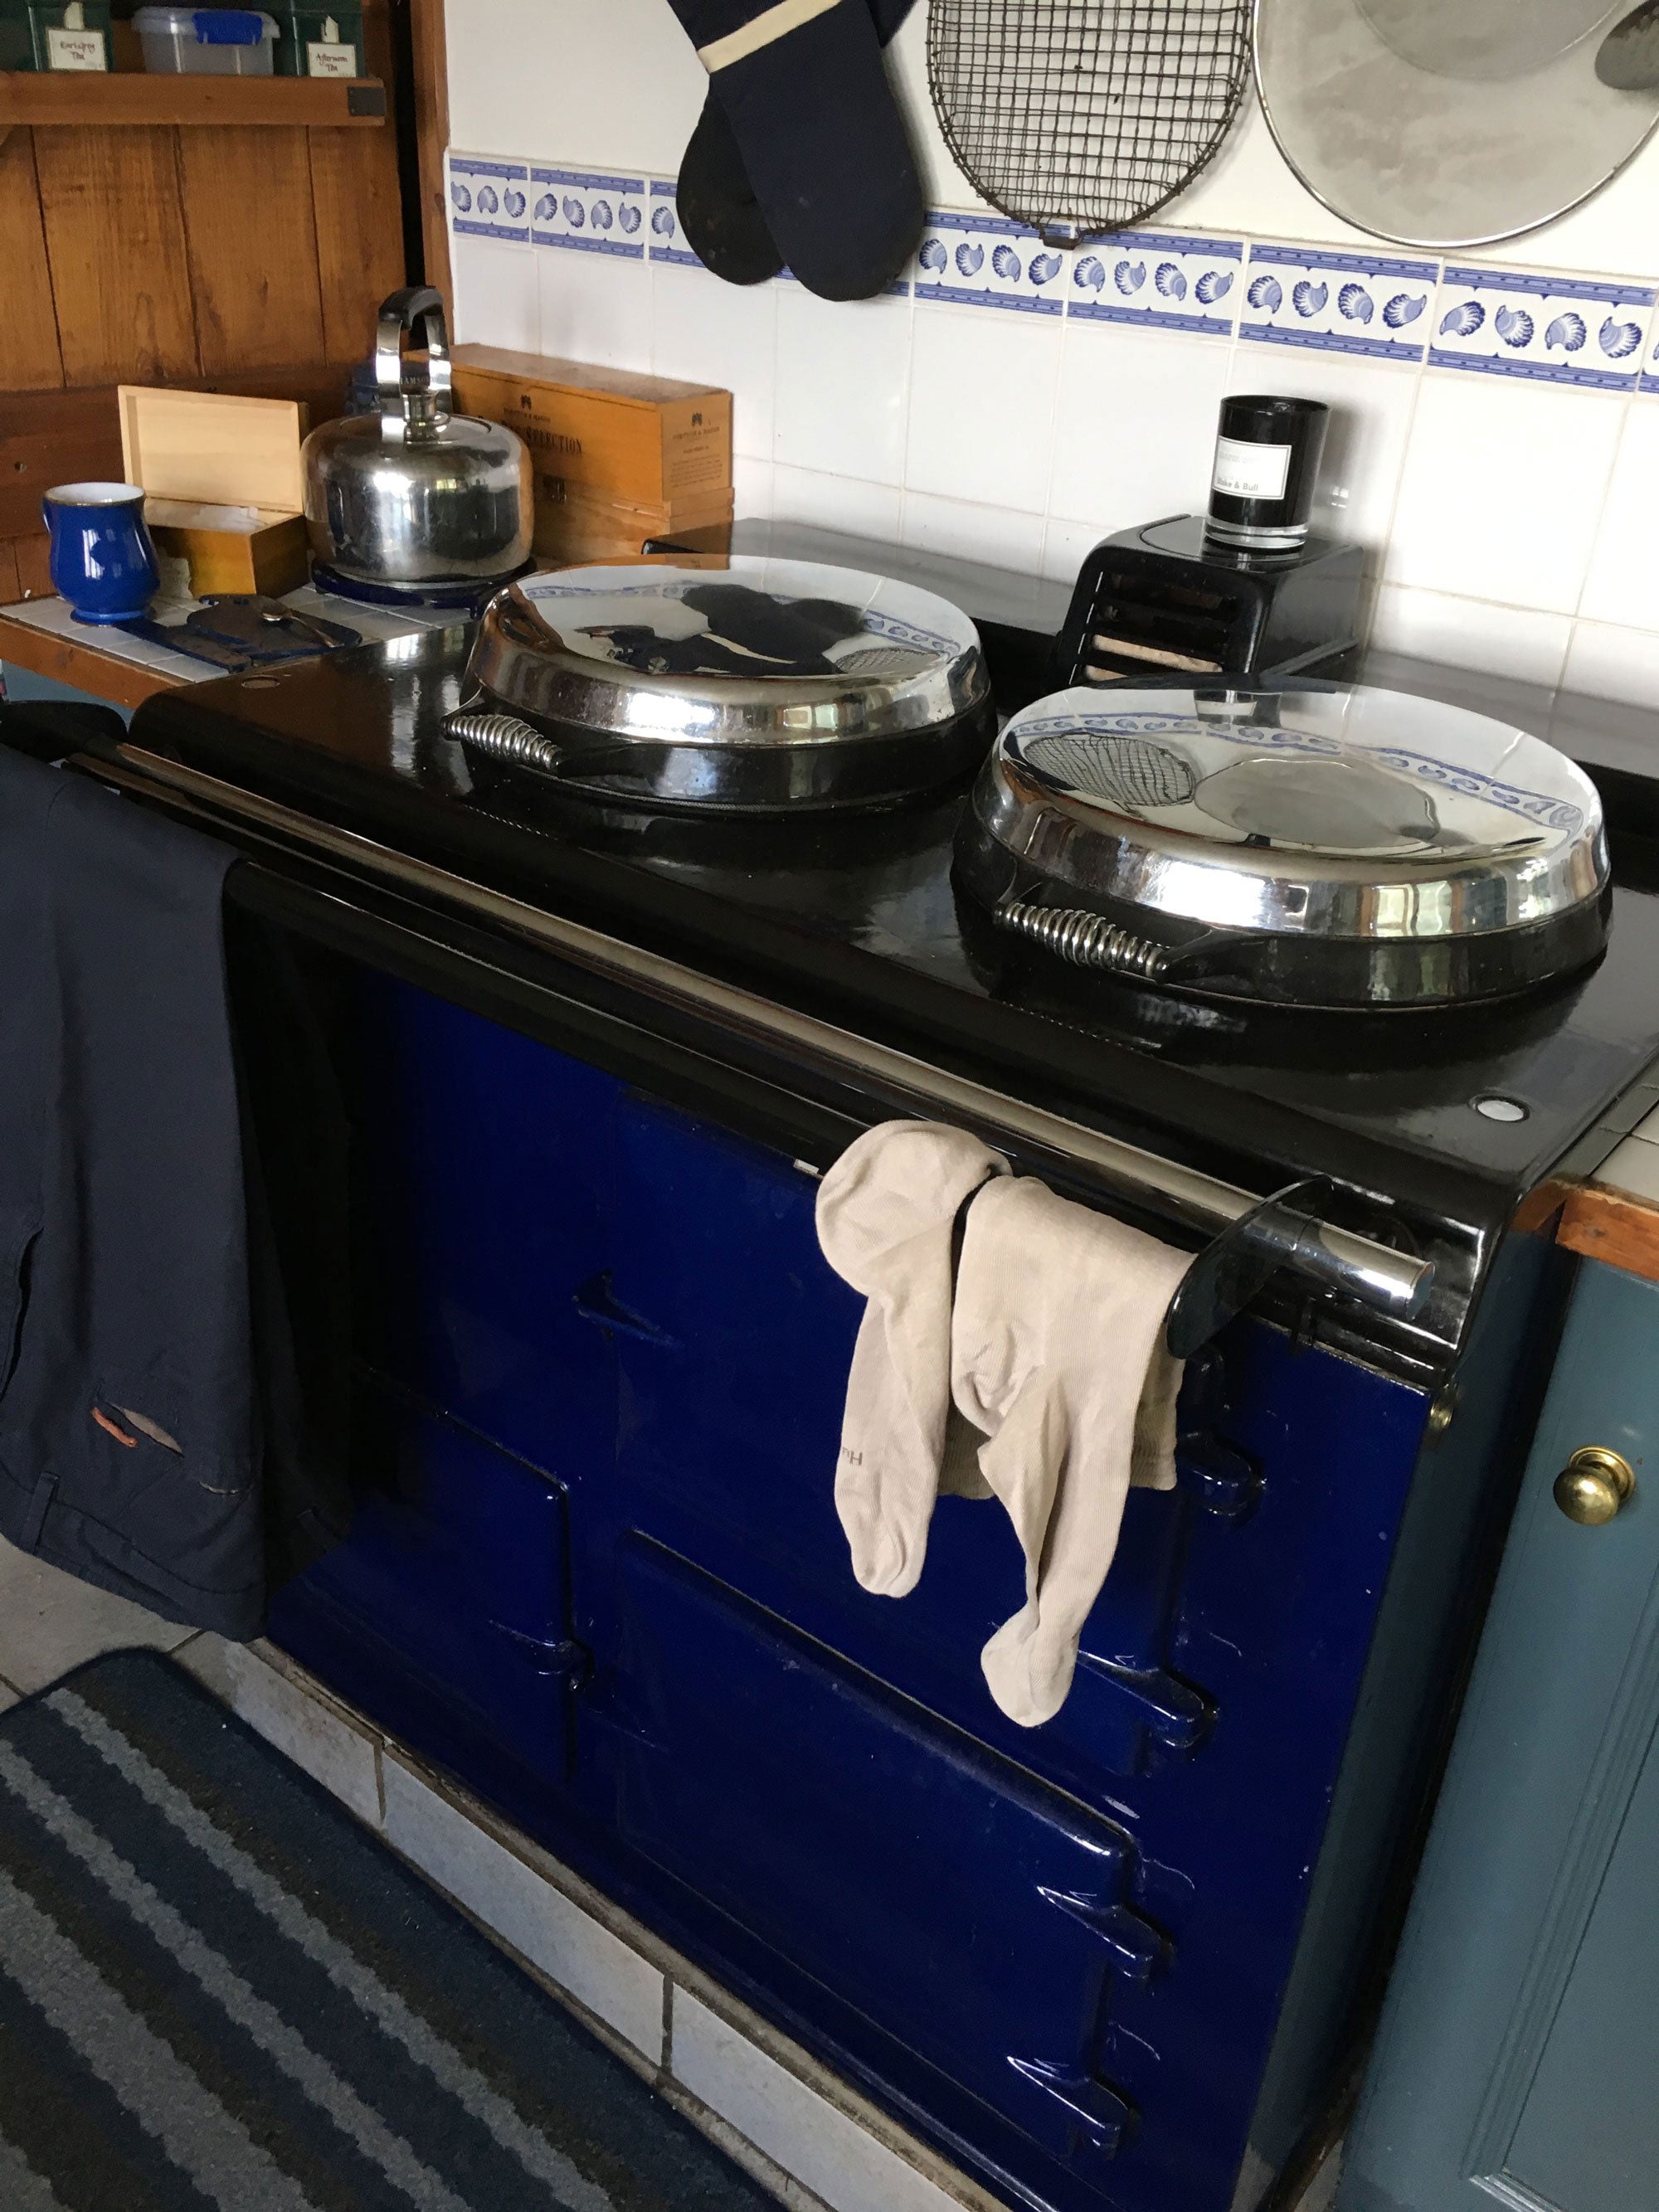 Blue Aga range cooker with drying rail